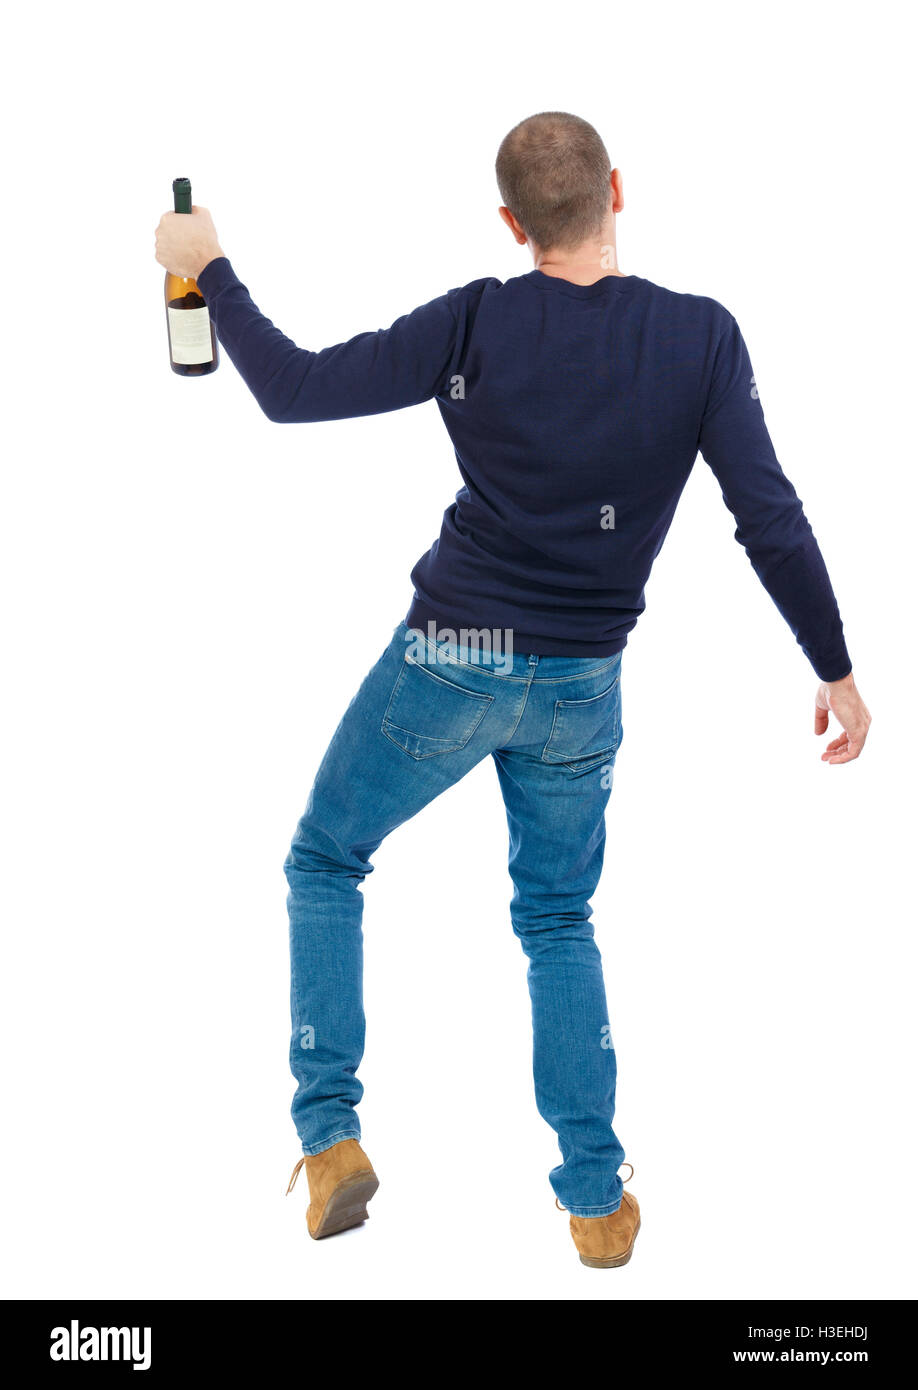 Back view of drunk man with bottle of wine. drinking young guy. Rear view people collection. backside view of person. Isolated over white background. Stock Photo